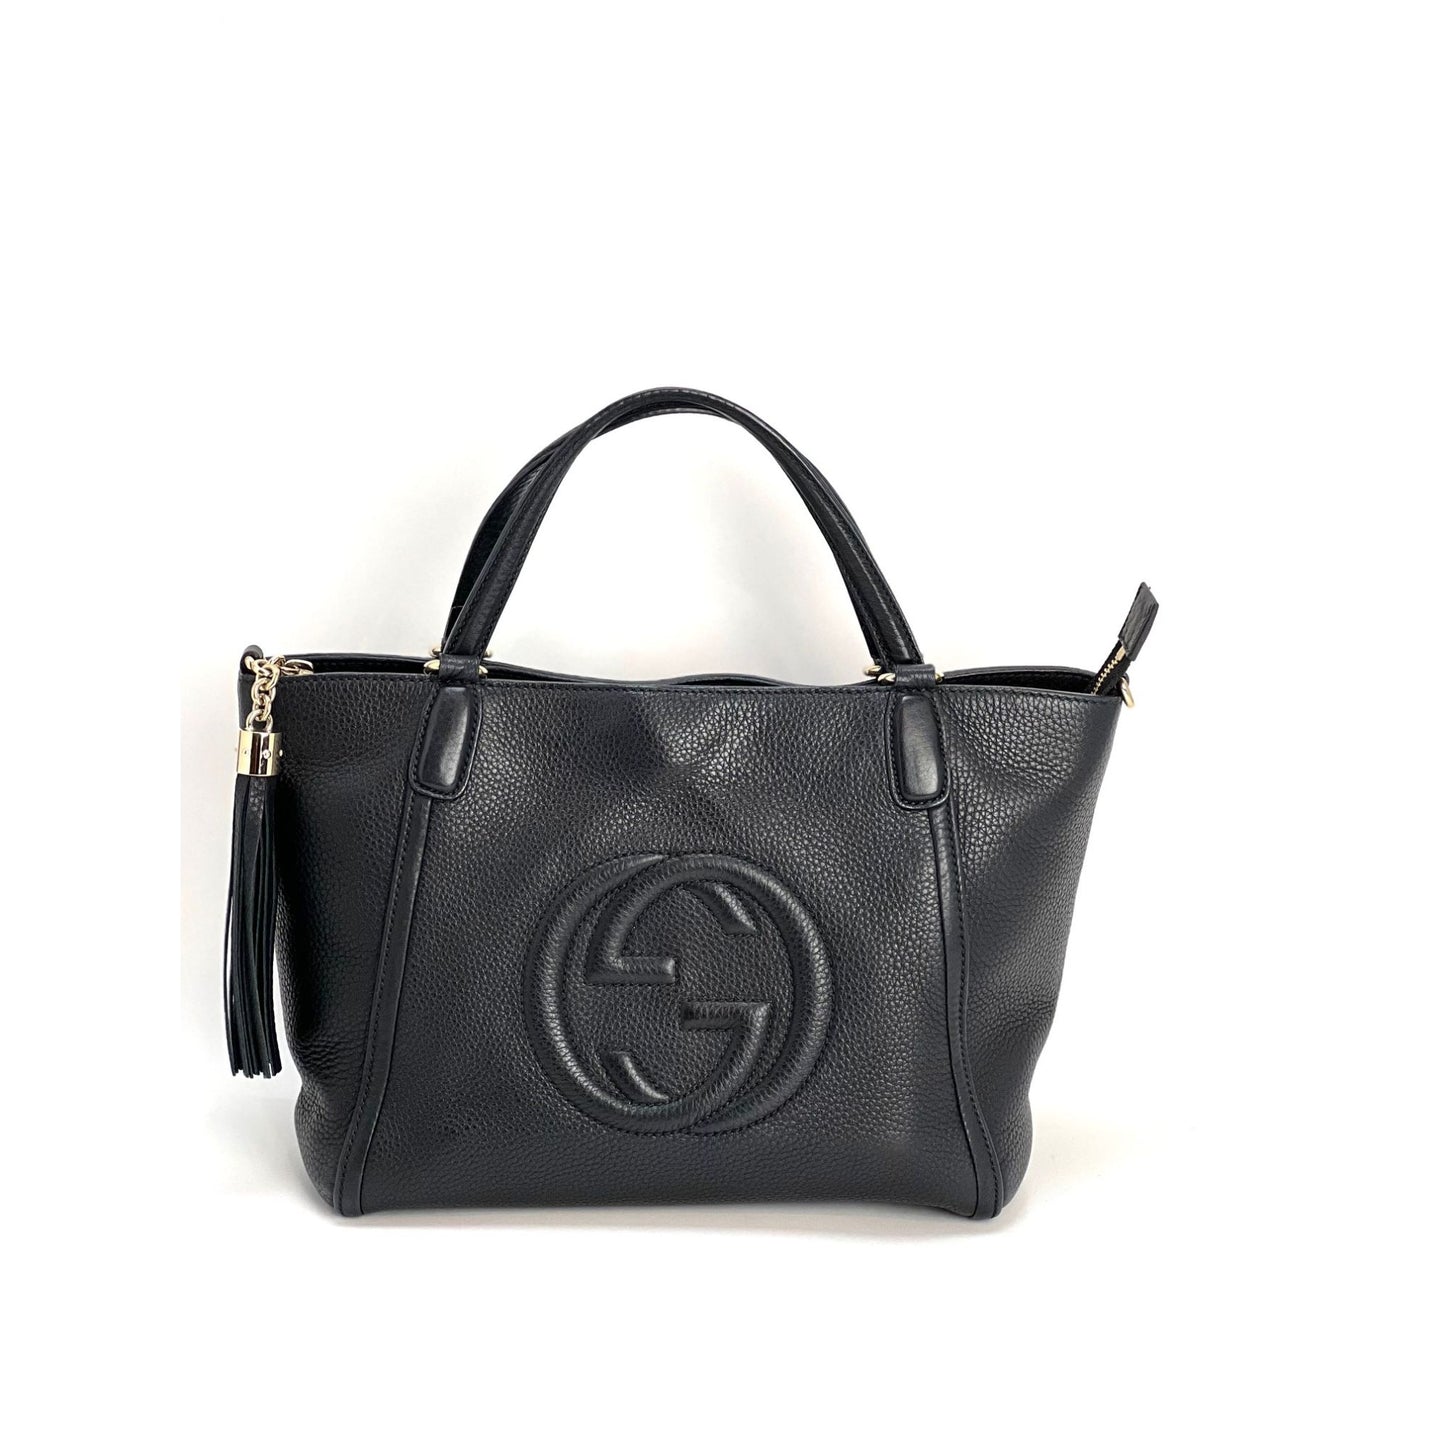 Gucci Soho Shopping Bag in Black Grained Leather